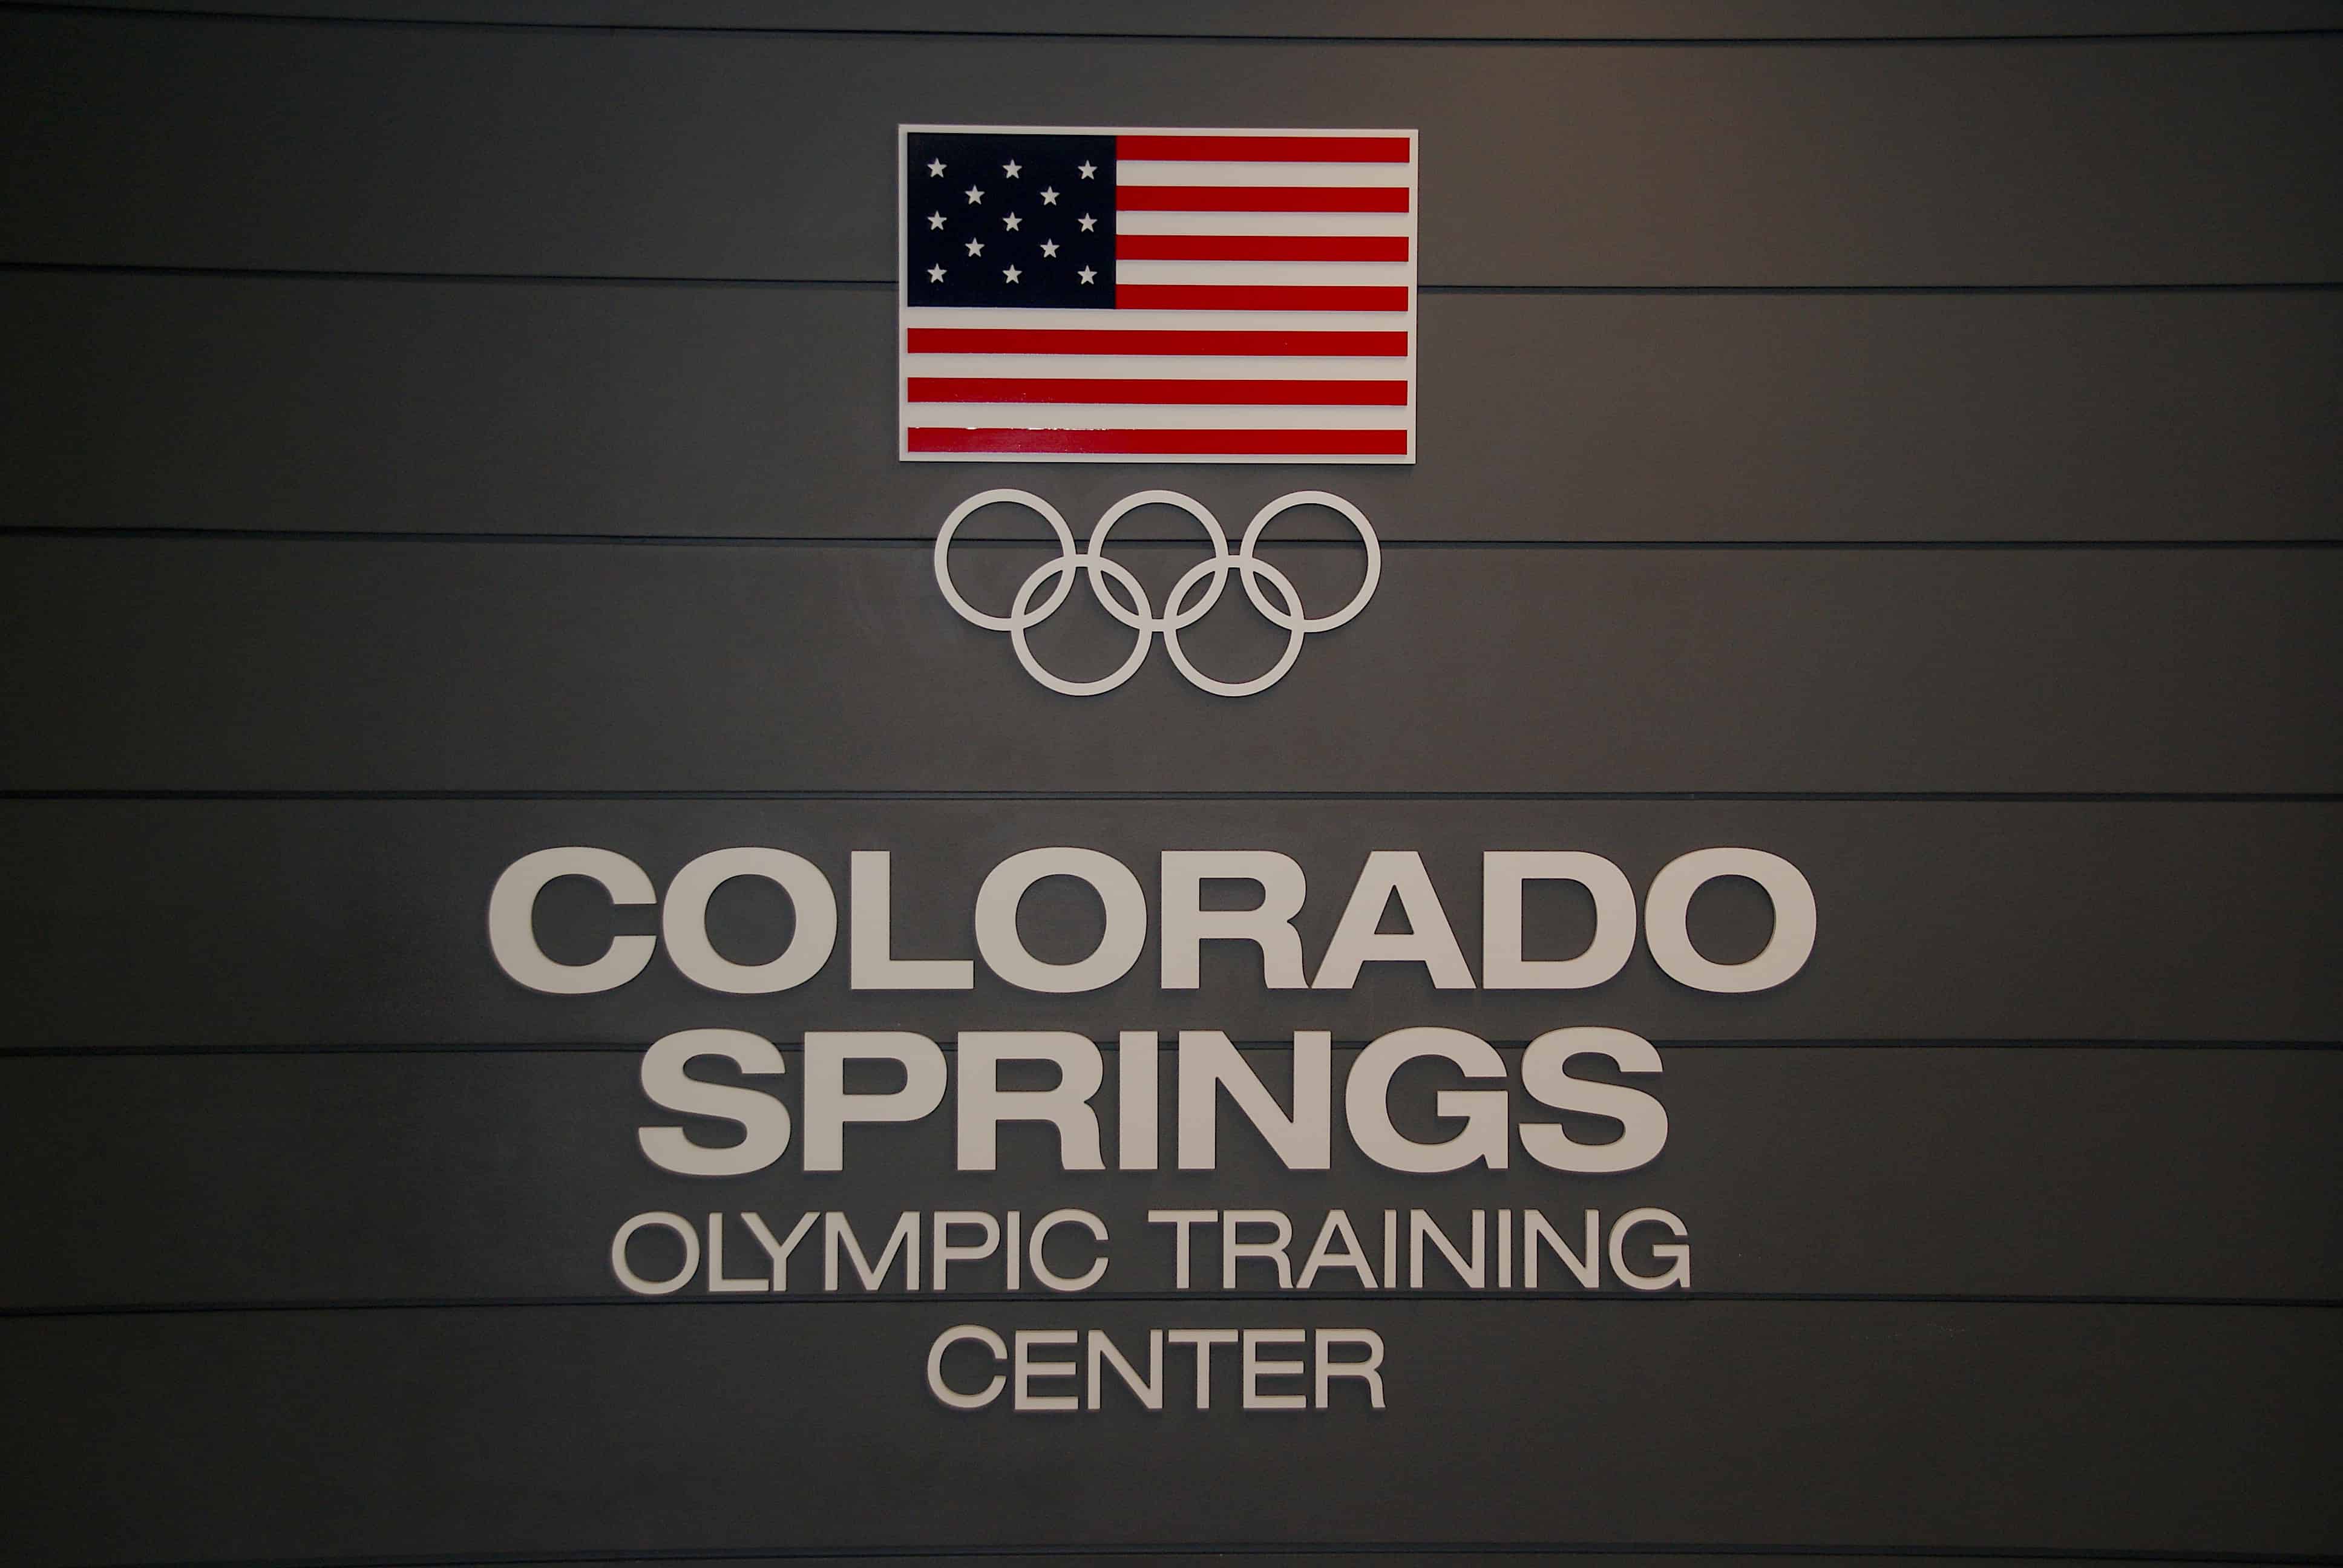 Colorado Springs Olympic Training Center Entrance Sign.